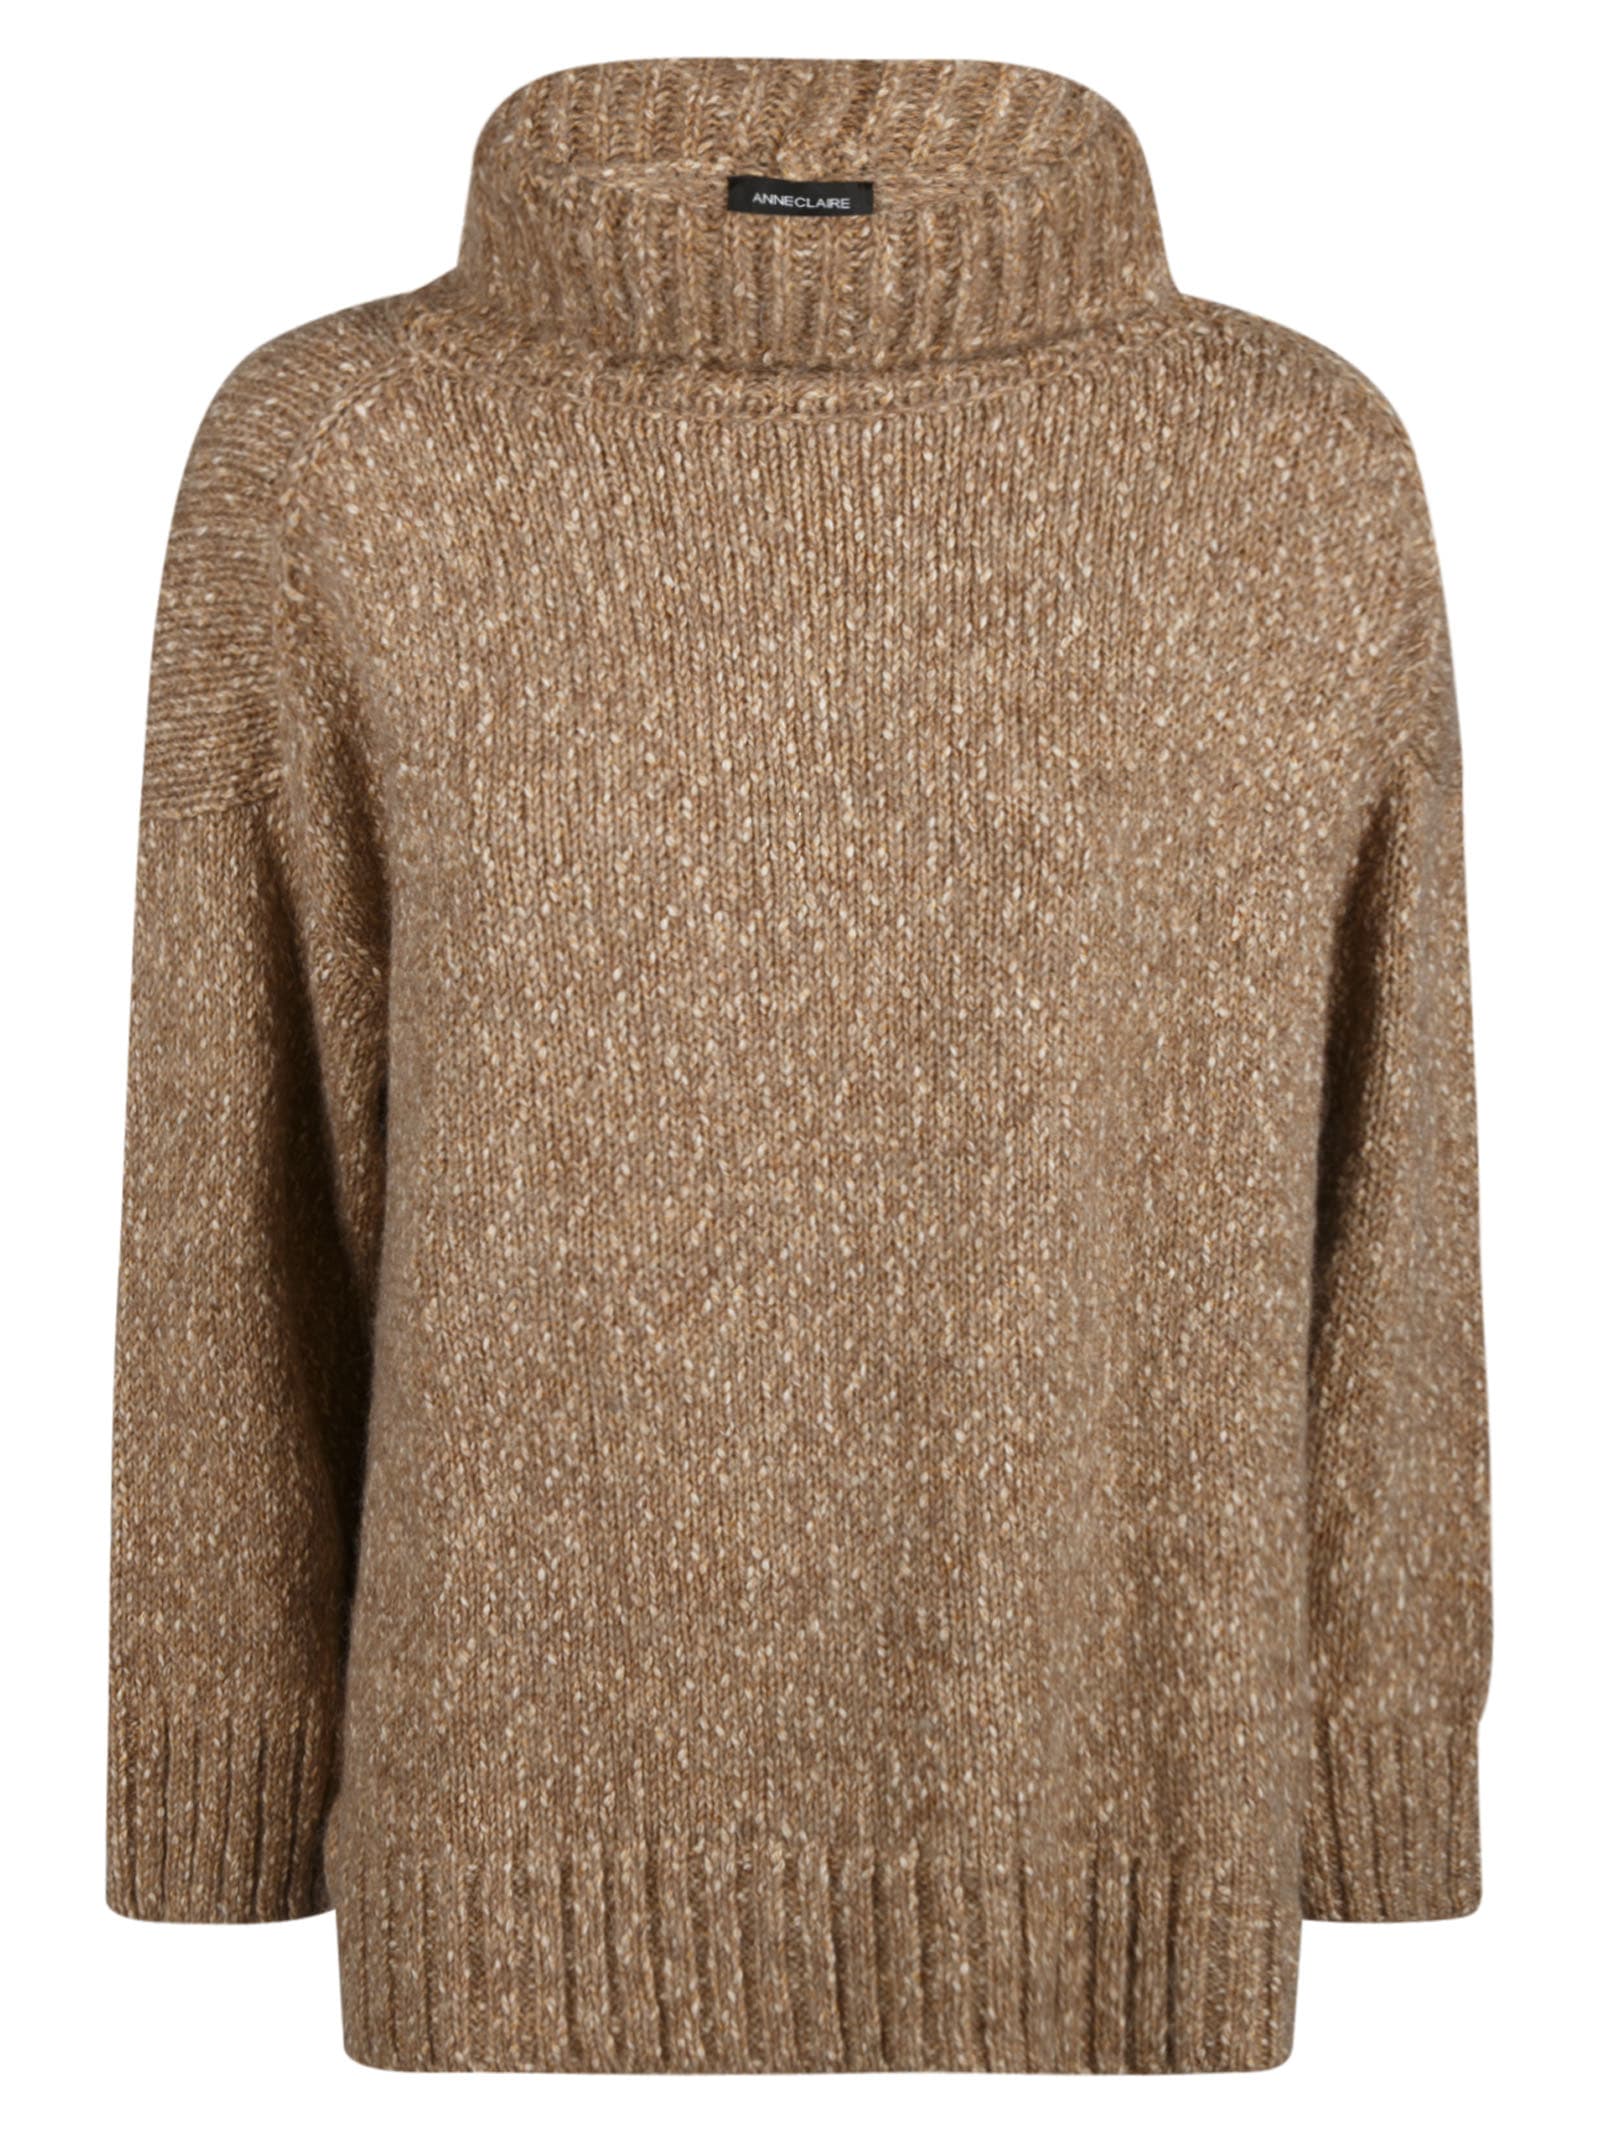 Anneclaire Wide Neck Rib Trimmed Sweater